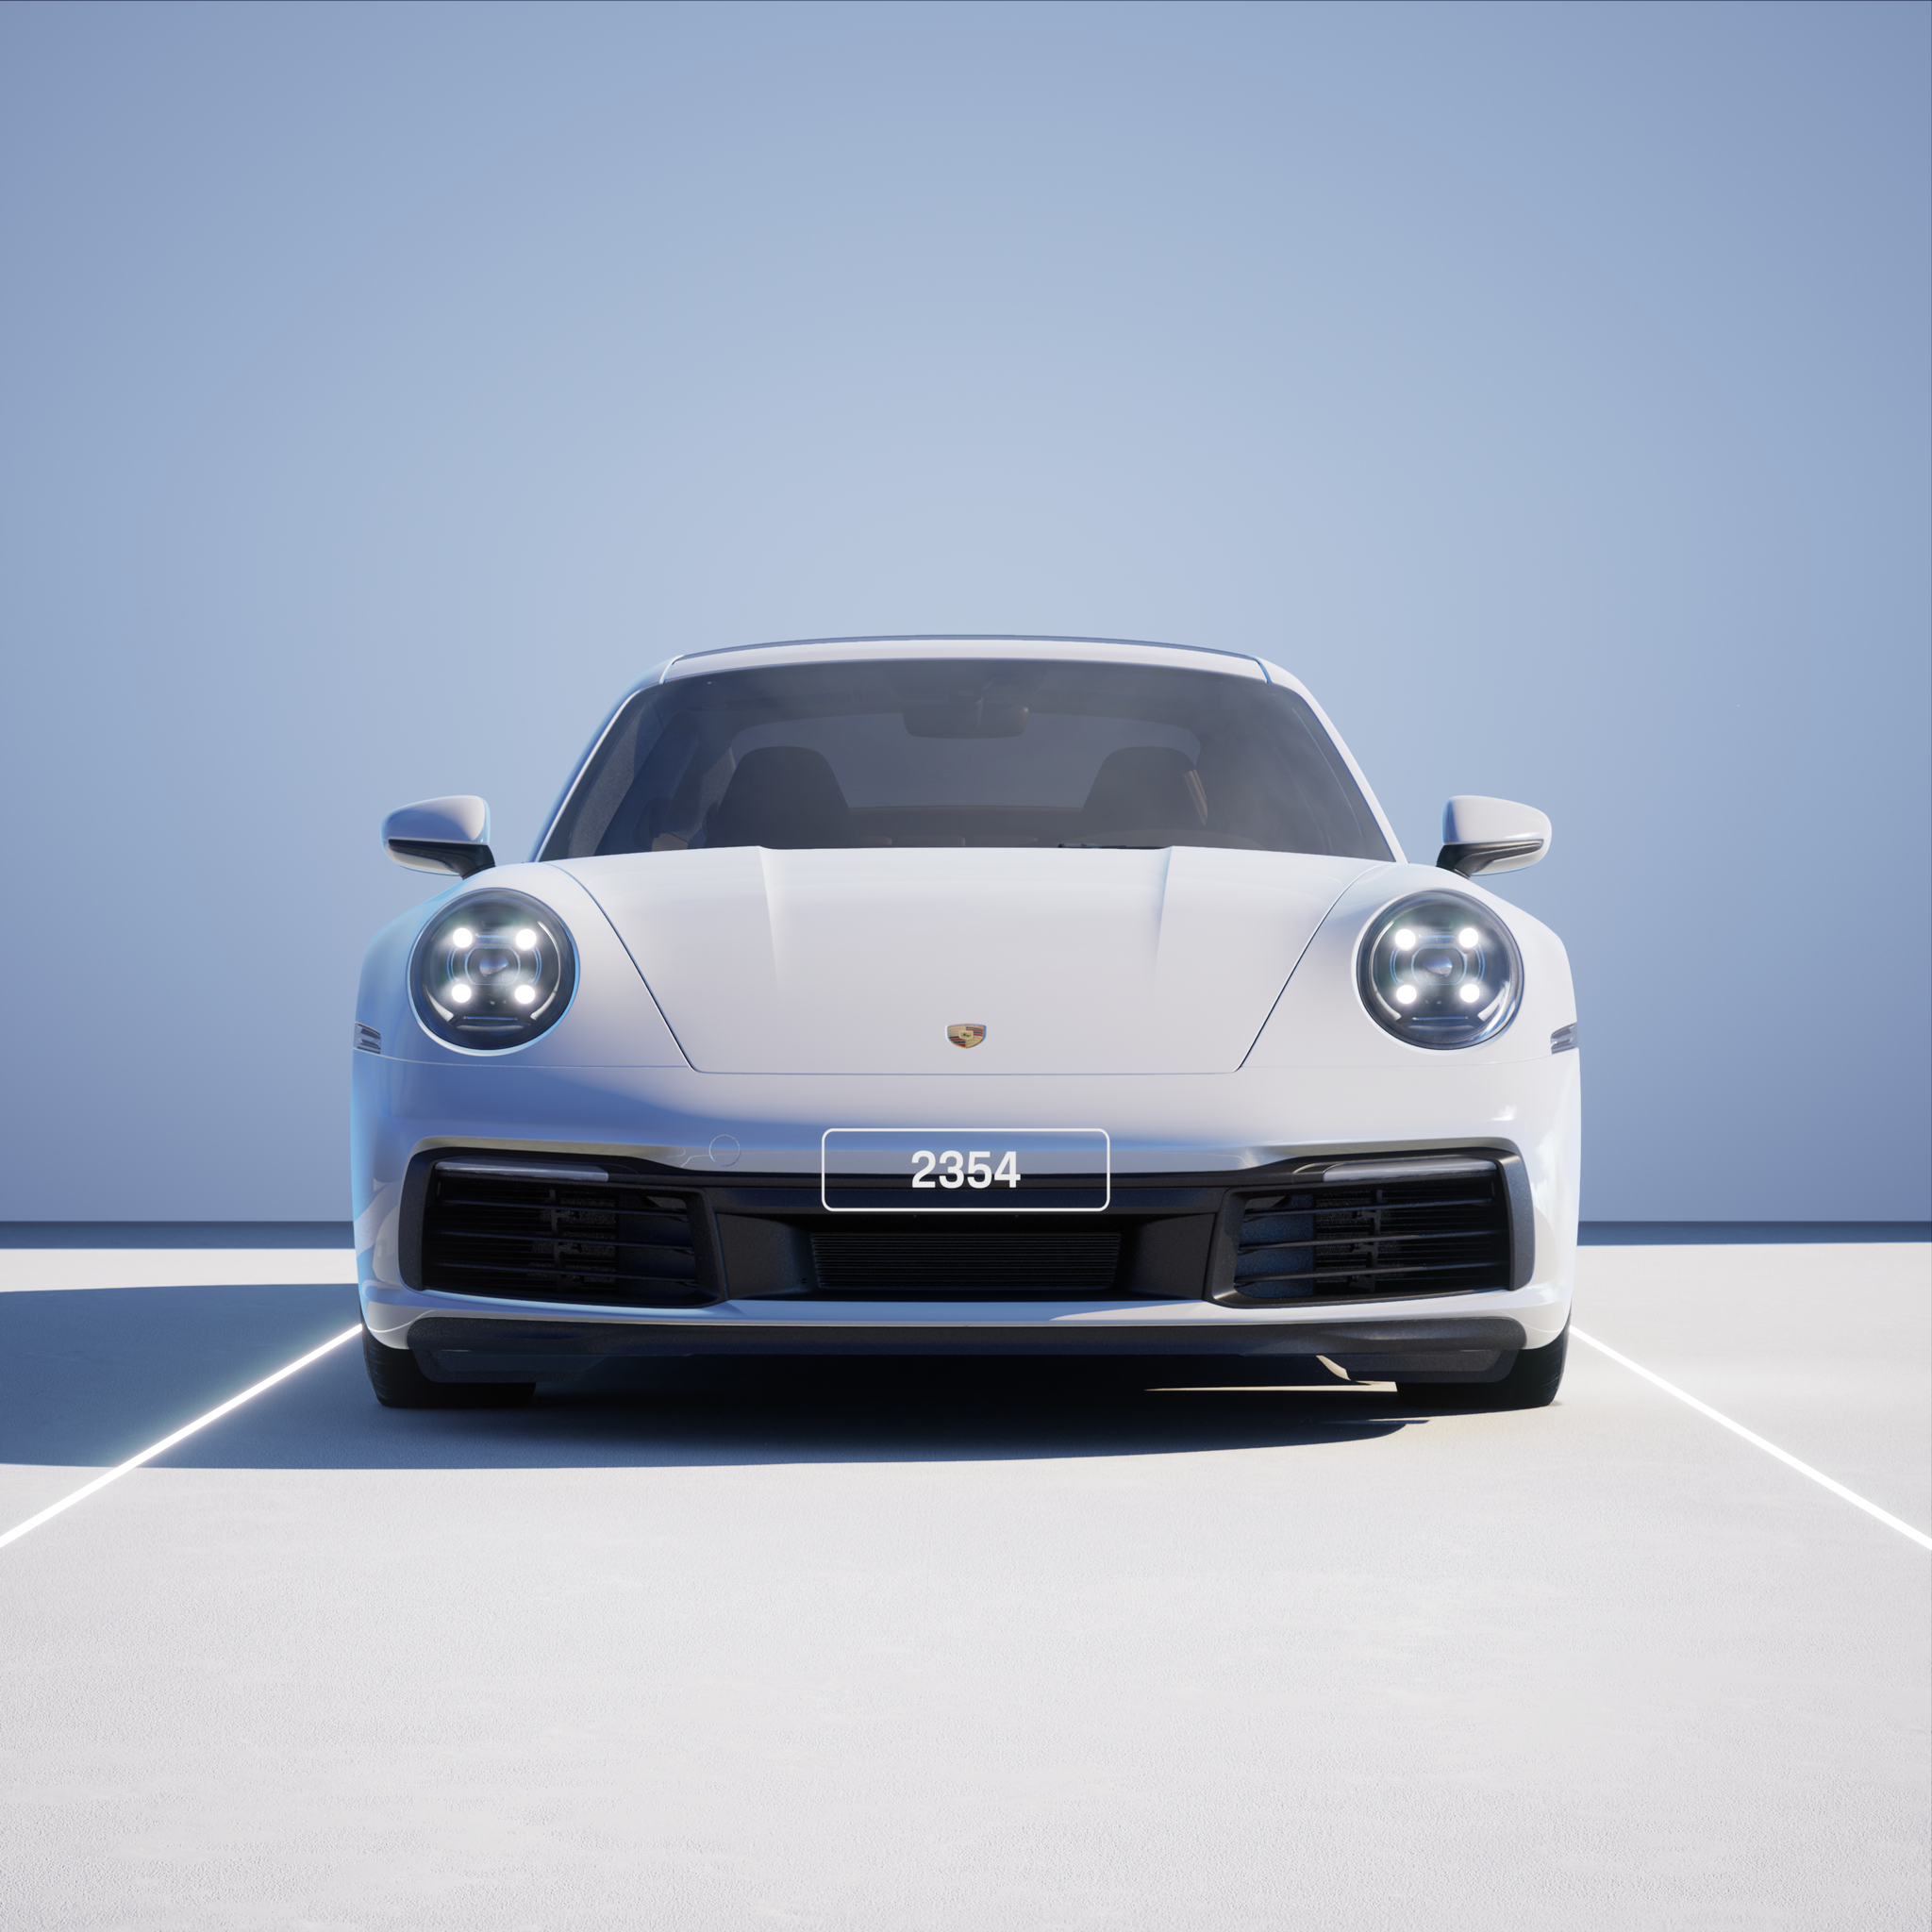 The PORSCHΞ 911 2354 image in phase